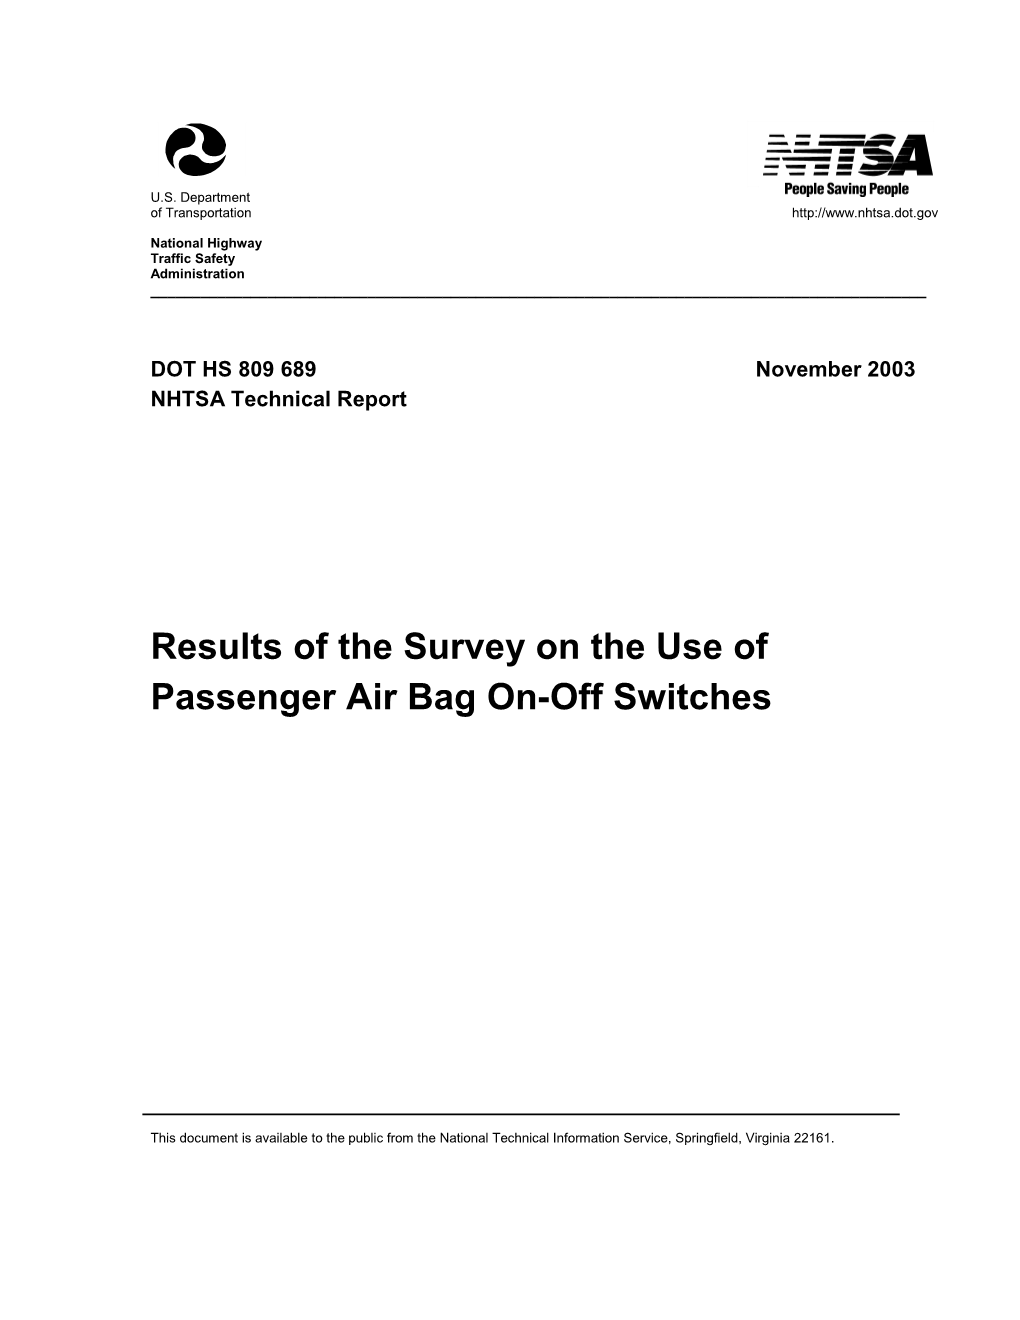 Results of the Survey on the Use of Passenger Air Bag On-Off Switches